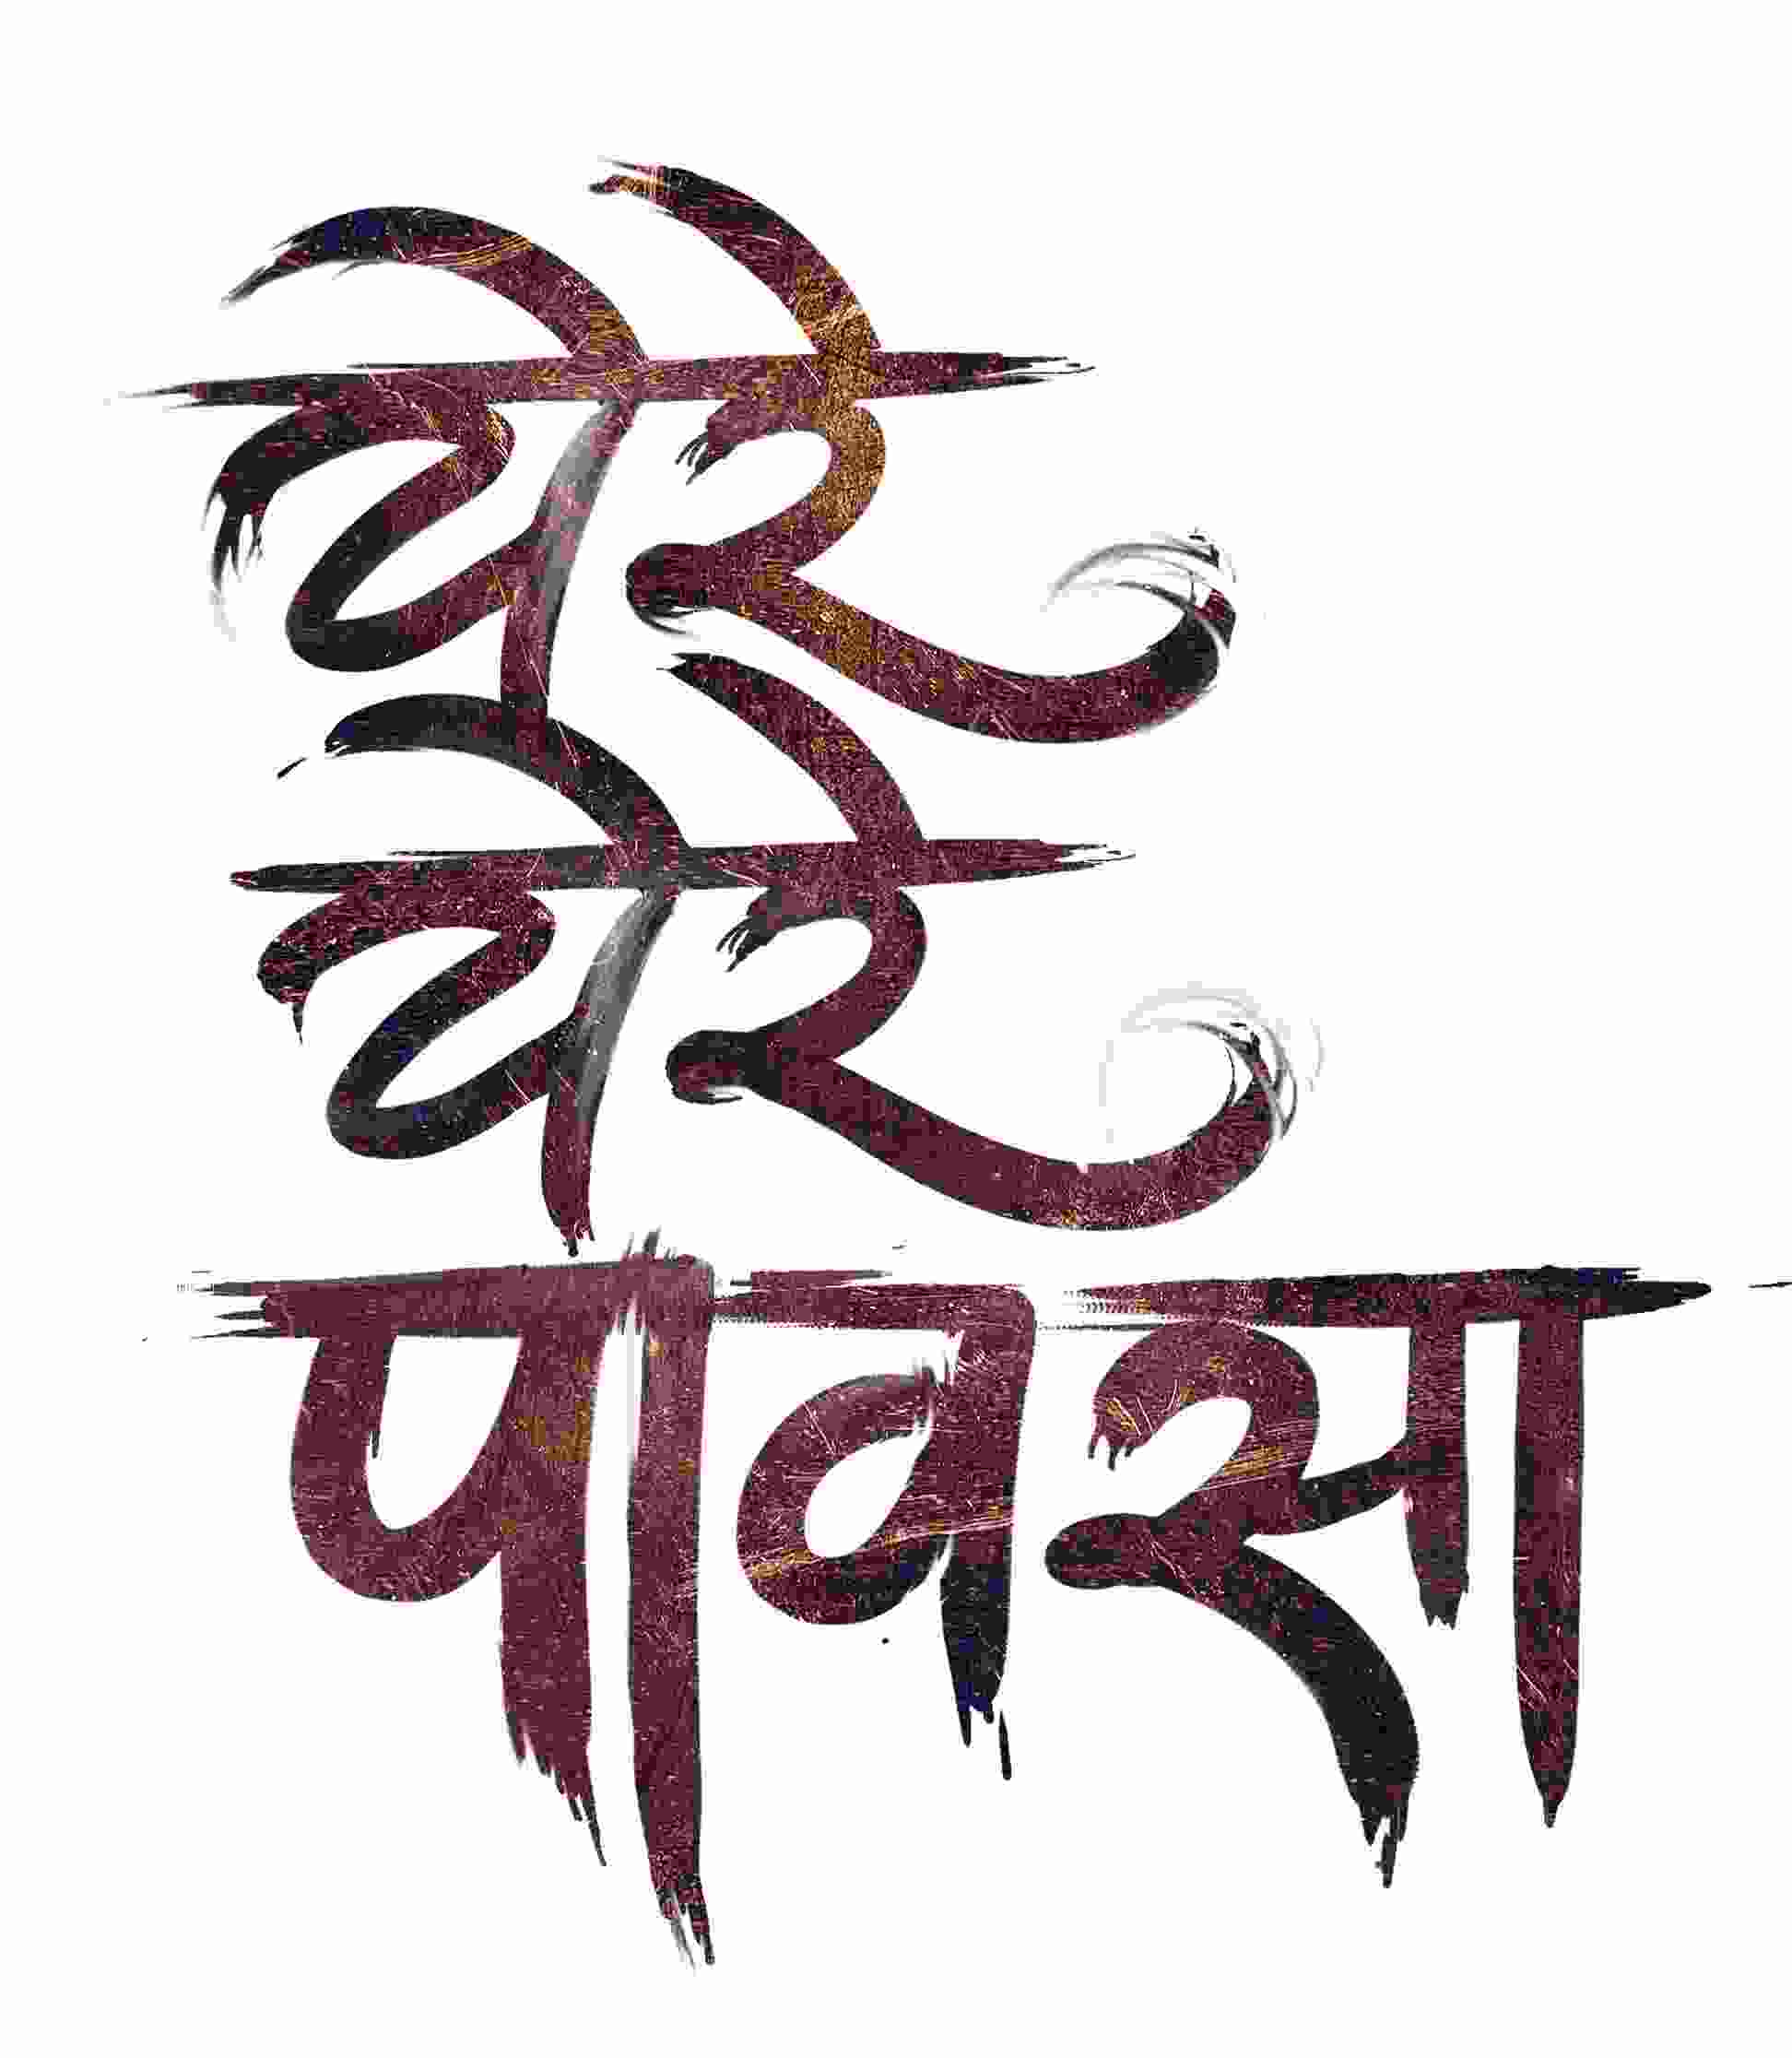 Upcoming Marathi film Yere Yere Pavasa selected for Jifoni Film Festival in Italy